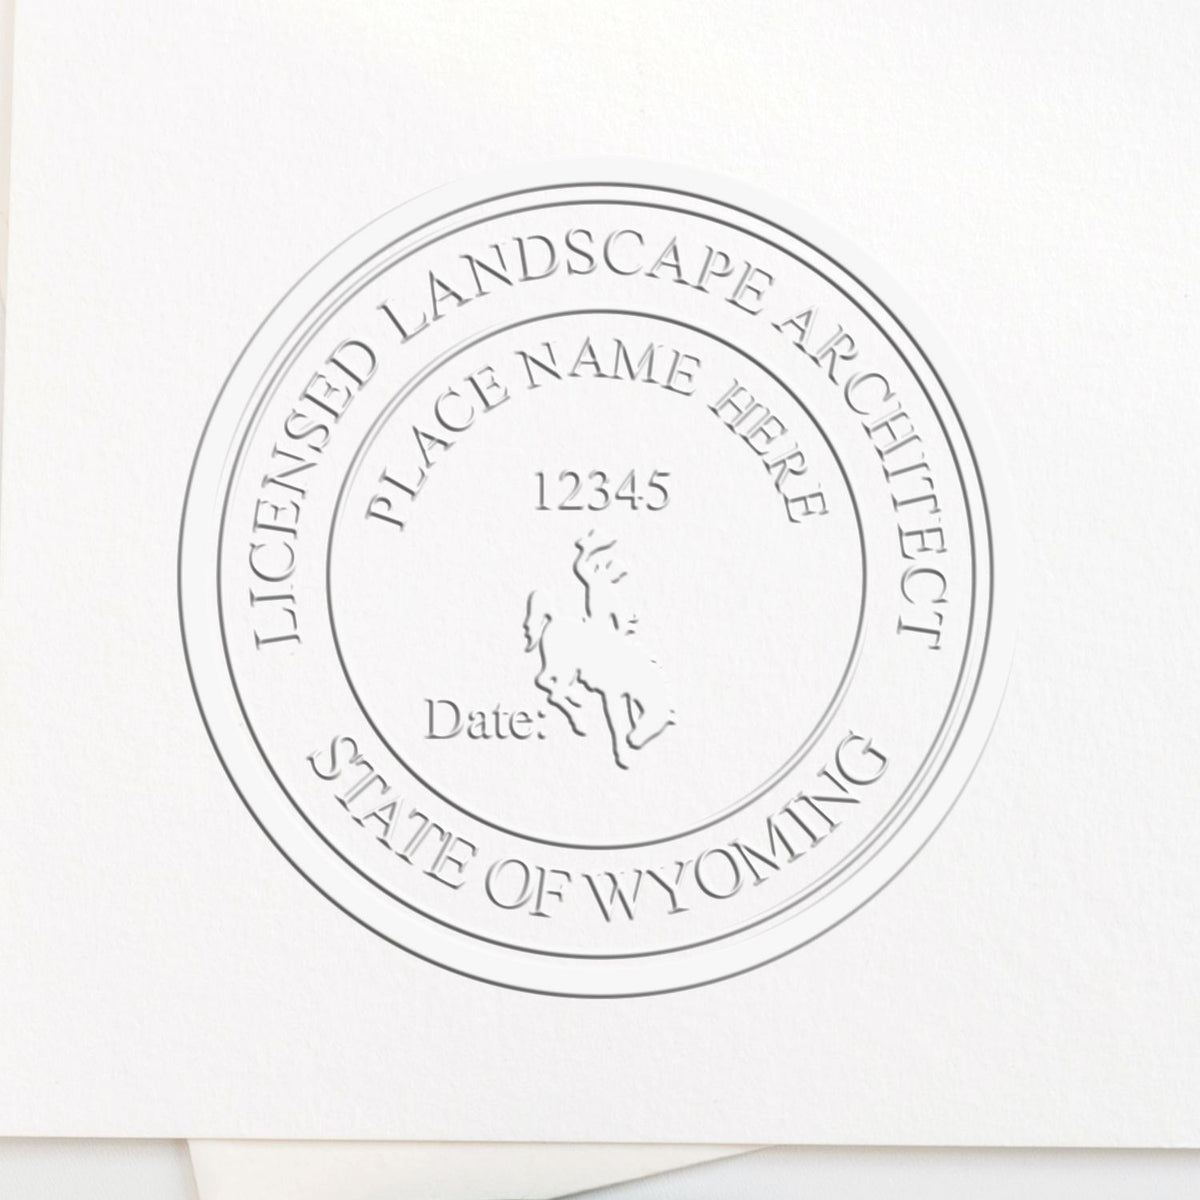 A photograph of the Hybrid Wyoming Landscape Architect Seal stamp impression reveals a vivid, professional image of the on paper.